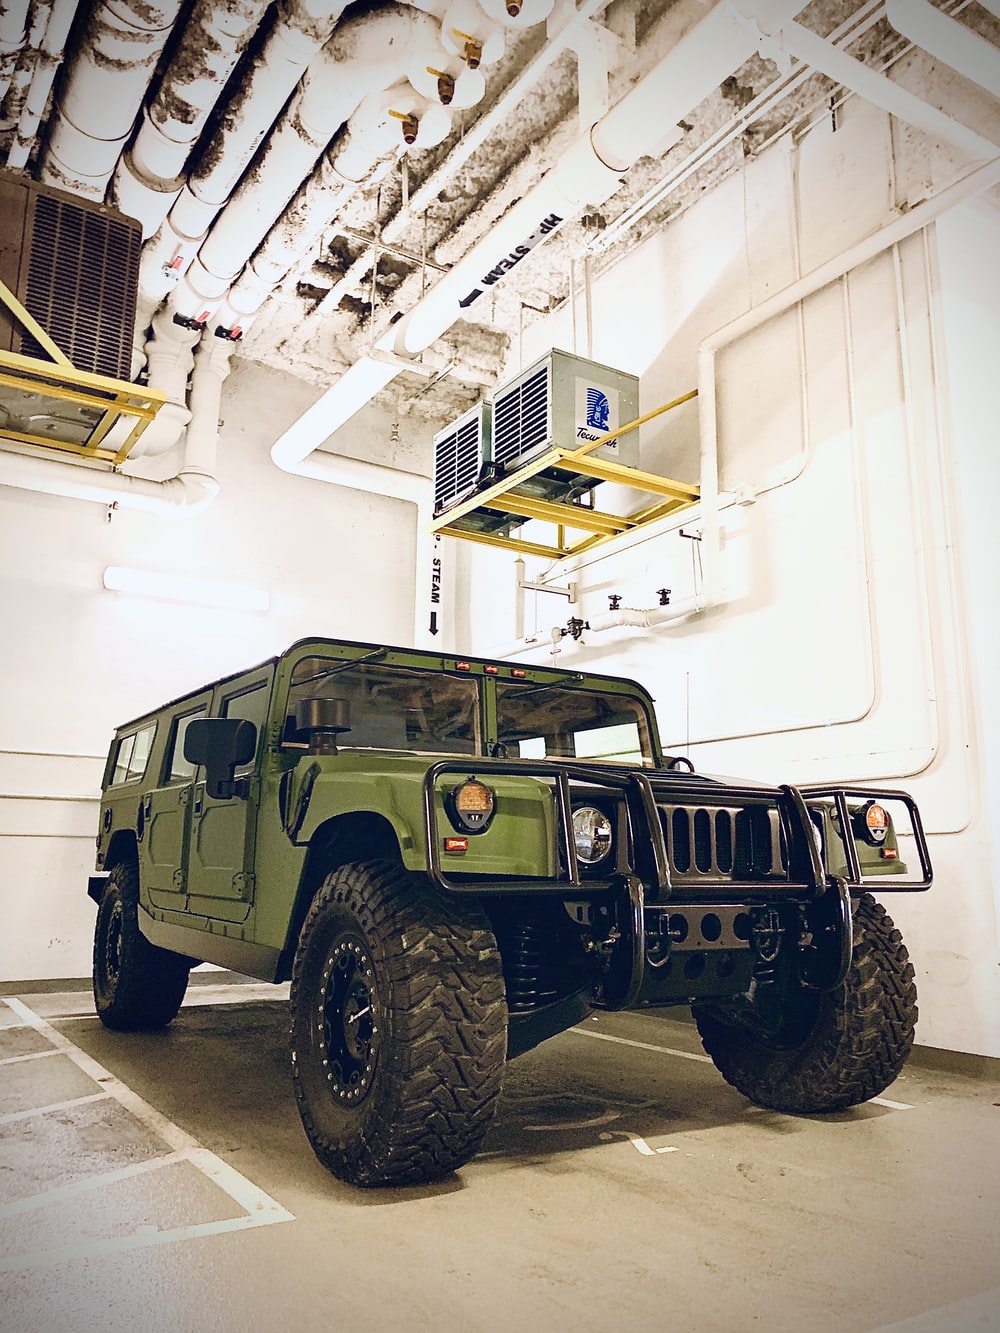 Hummer Picture. Download Free Image